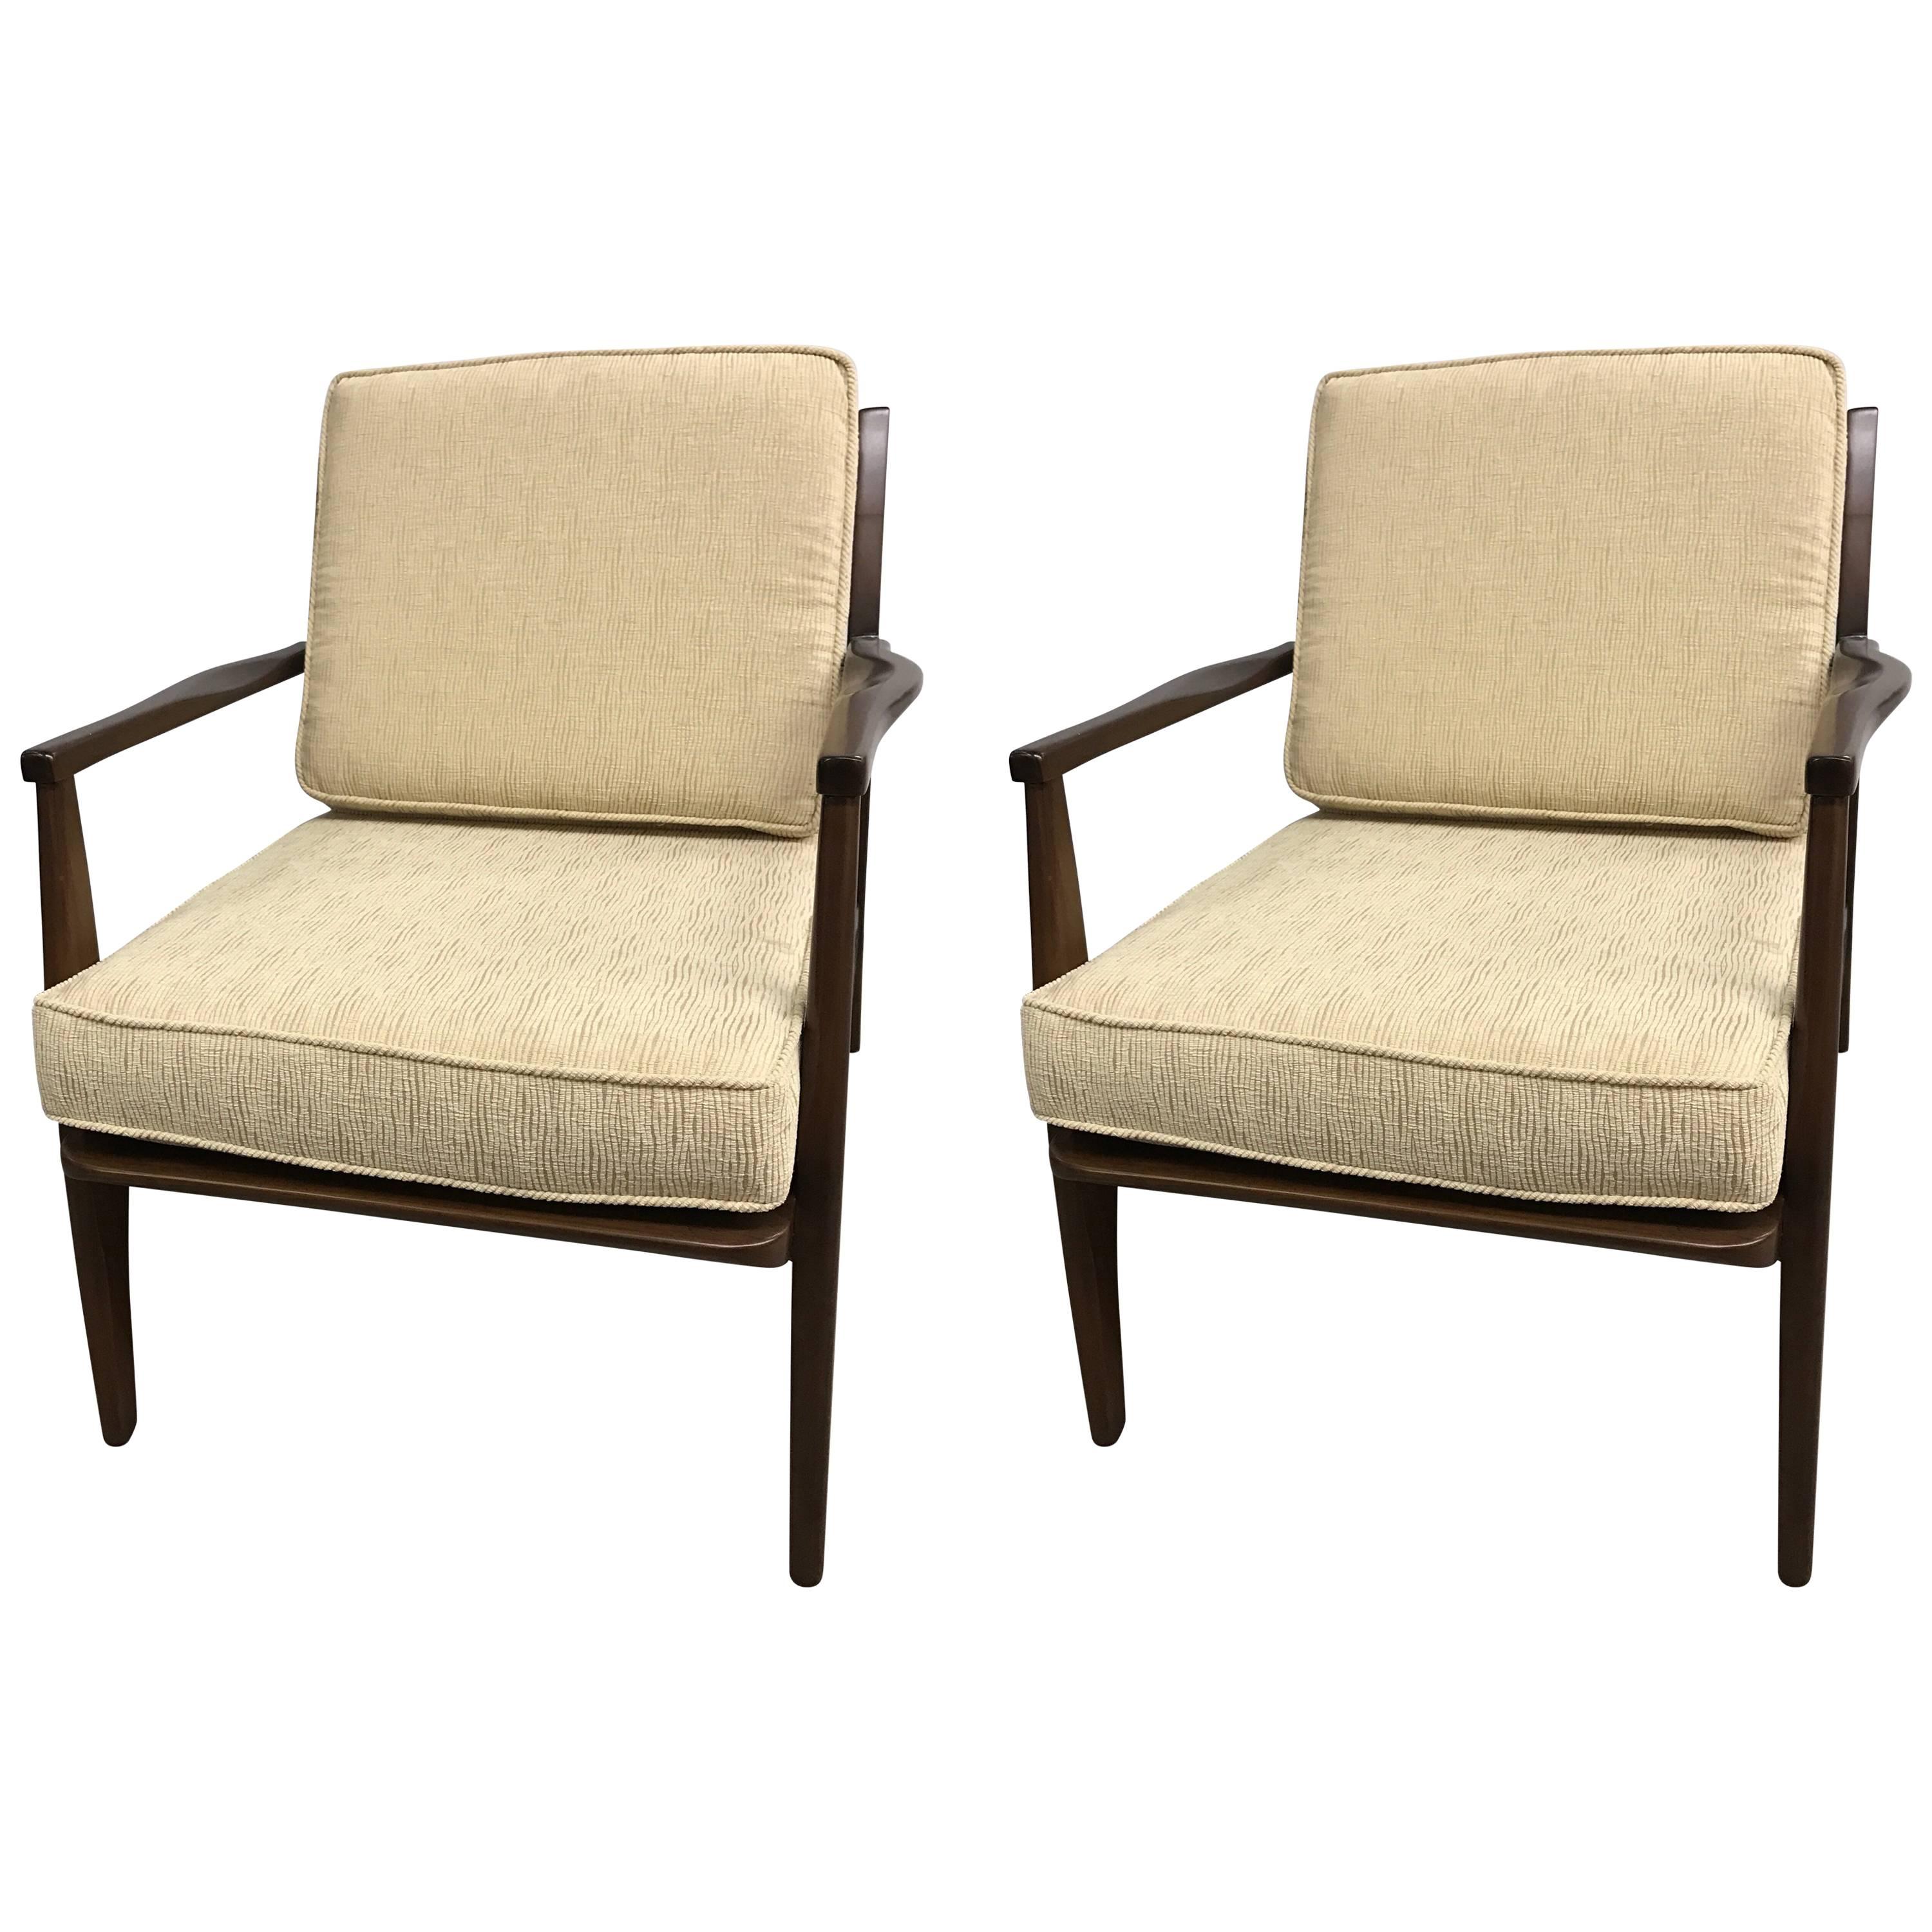 Pair of Danish Midcentury Modern Armchairs For Sale